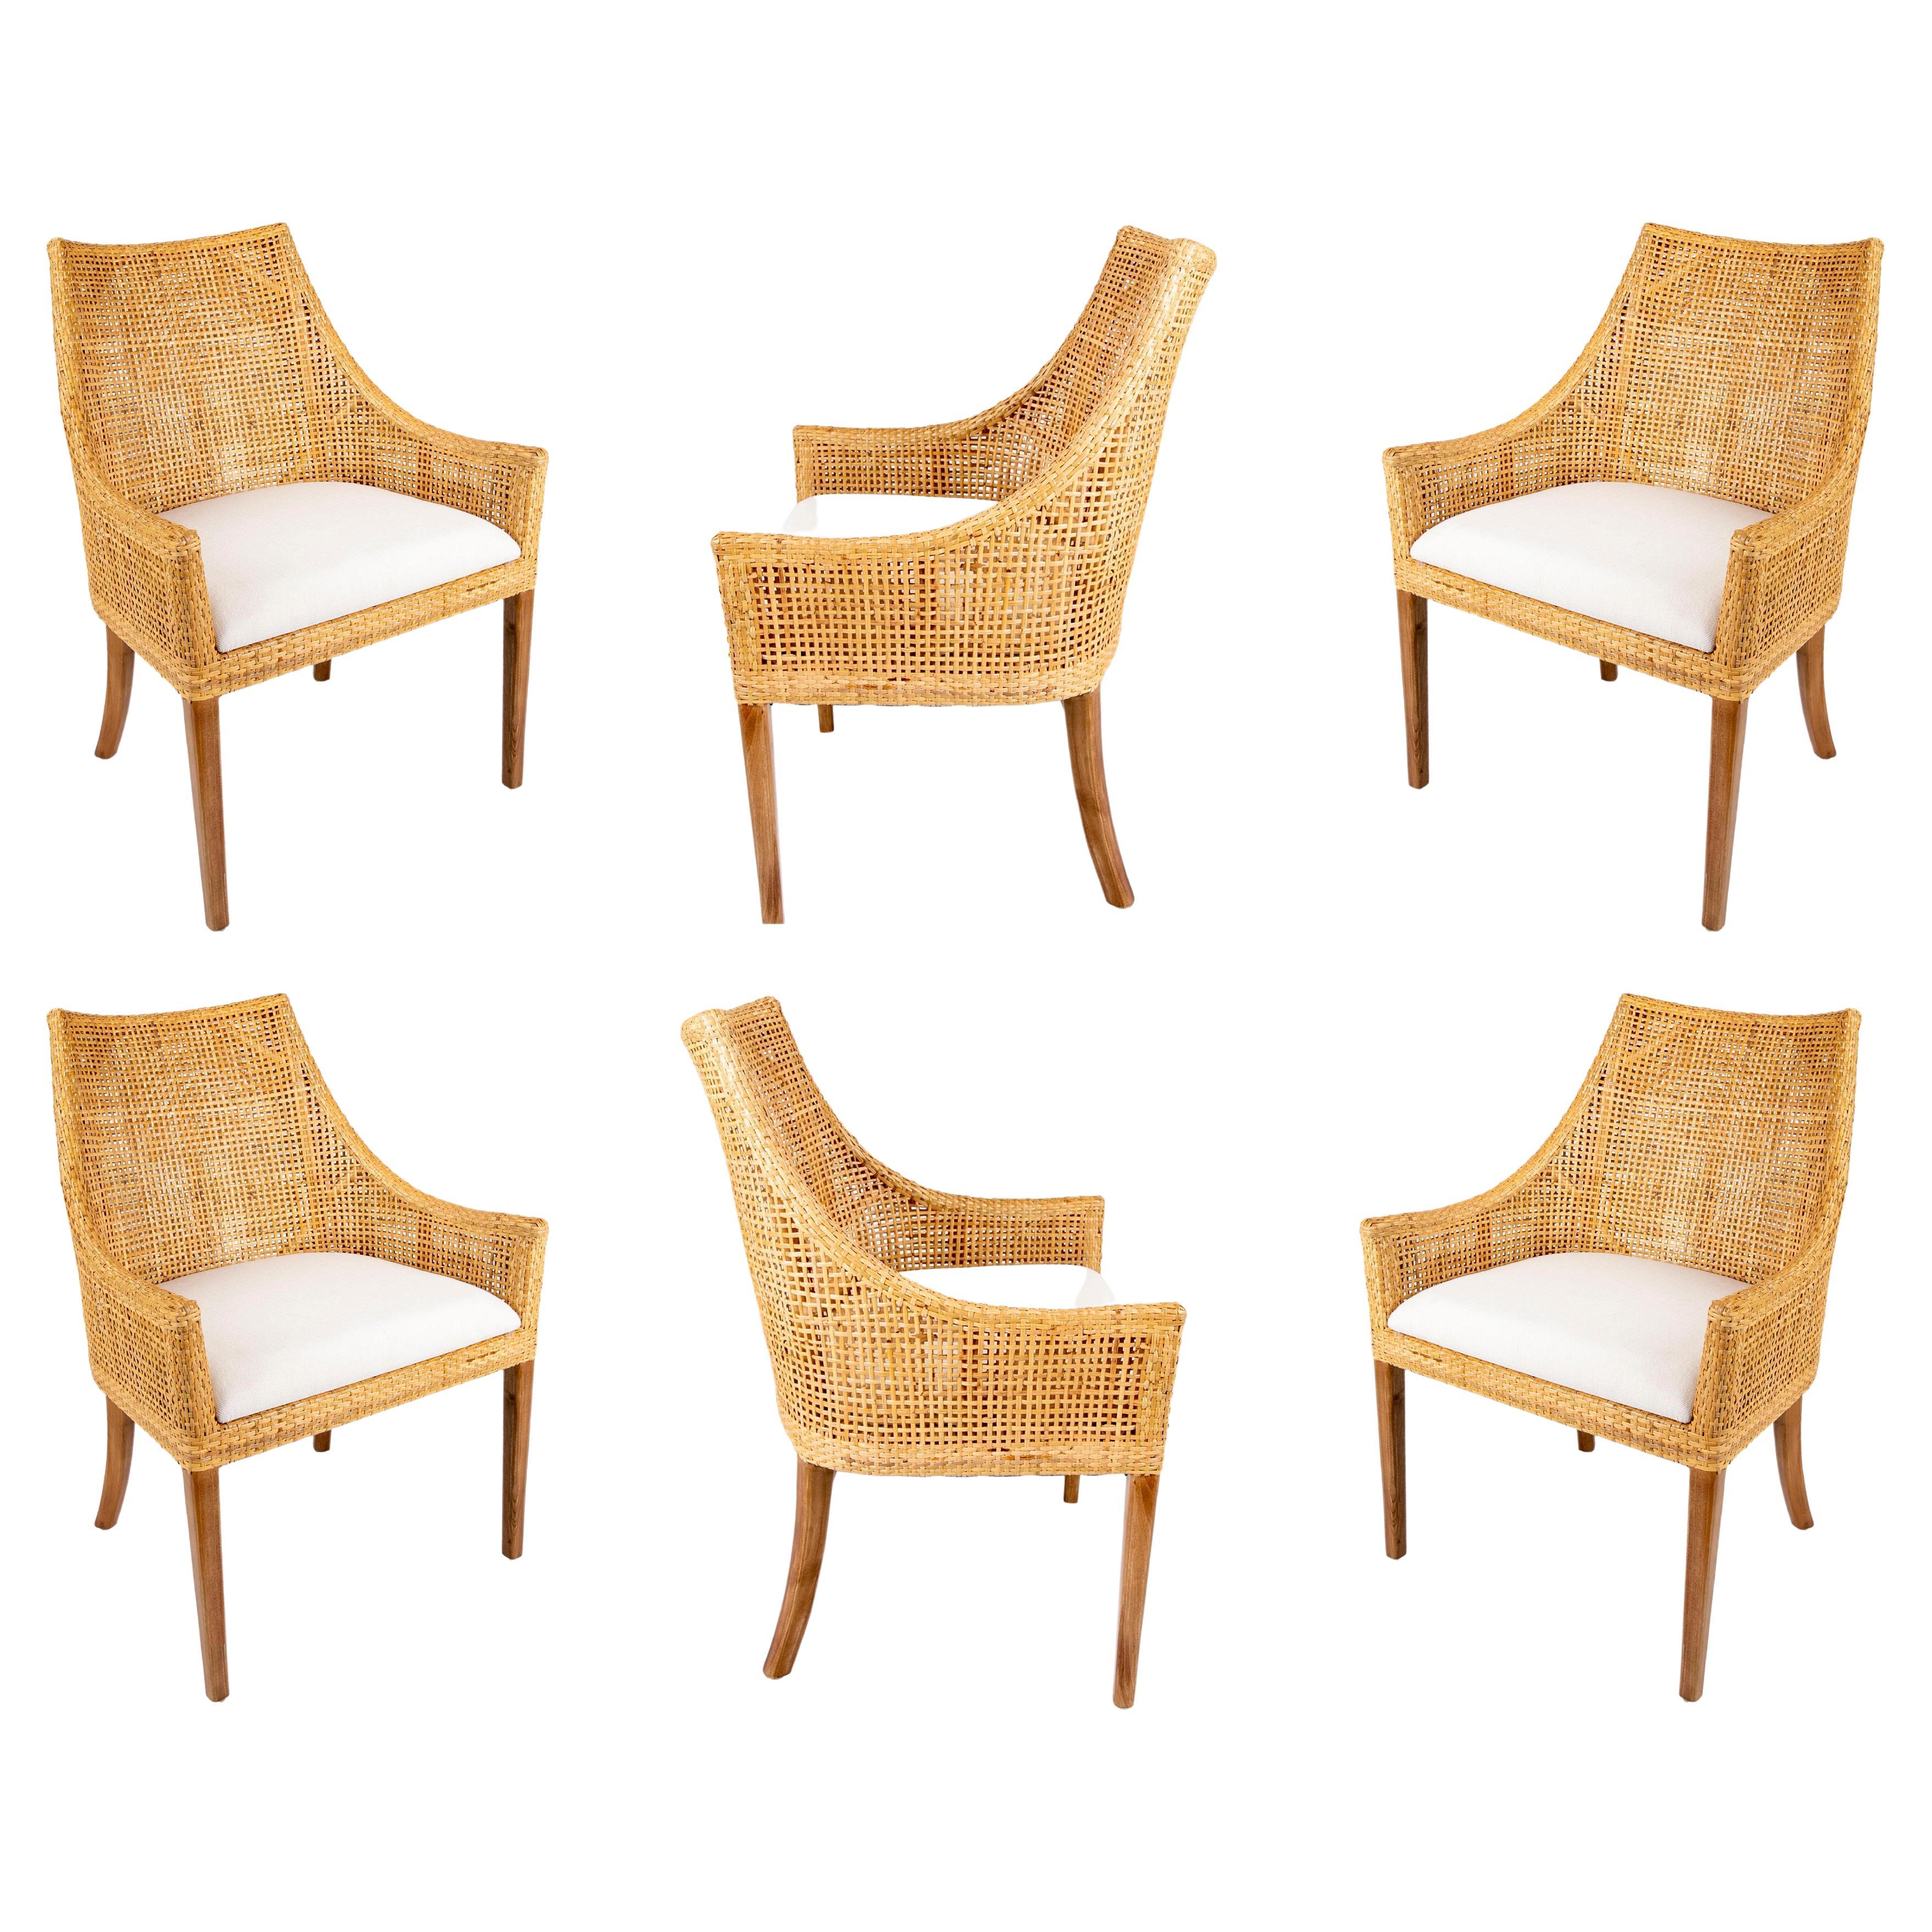 Set of Six Wicker and Mahogany-Legged Upholstered Chairs